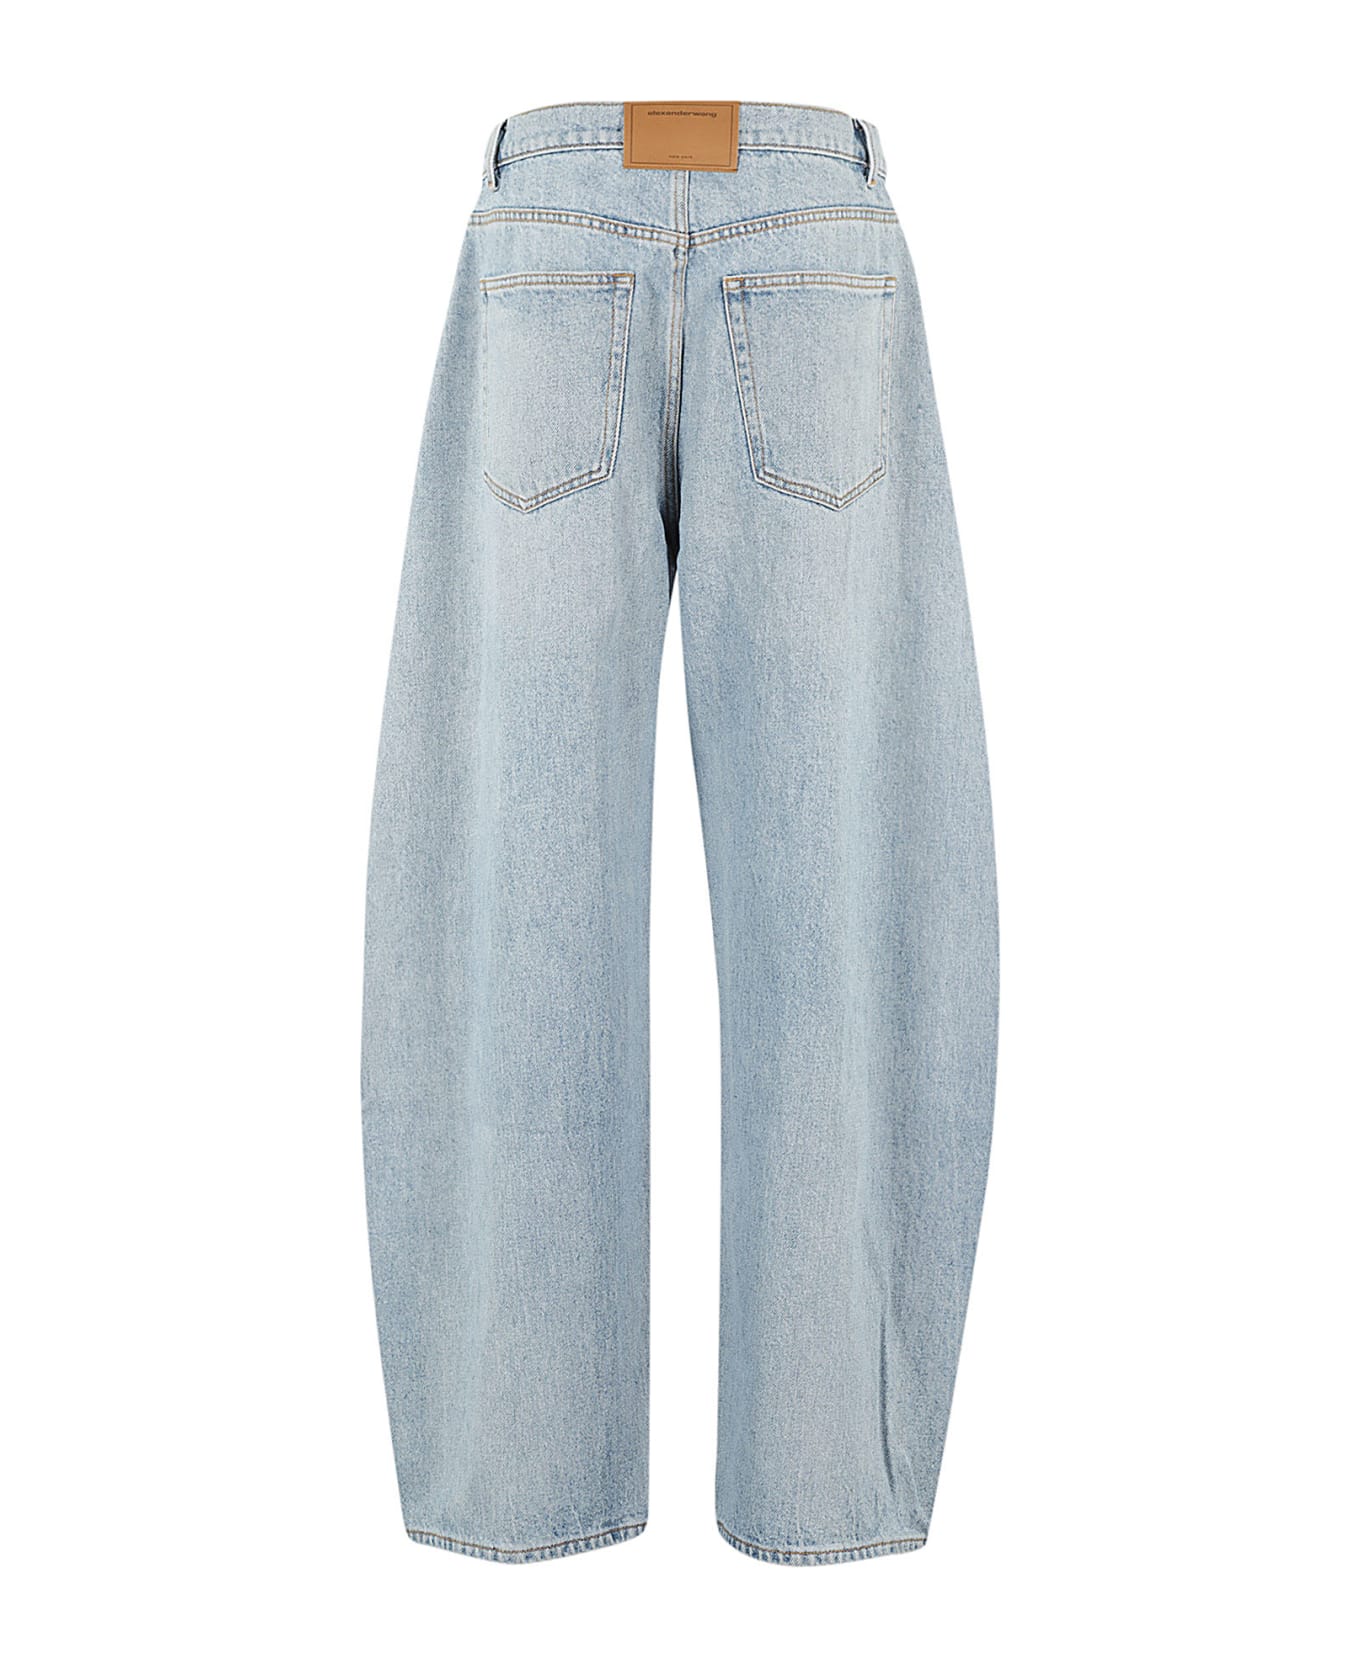 Alexander Wang Oversized Rounded Low Rise Jean - A